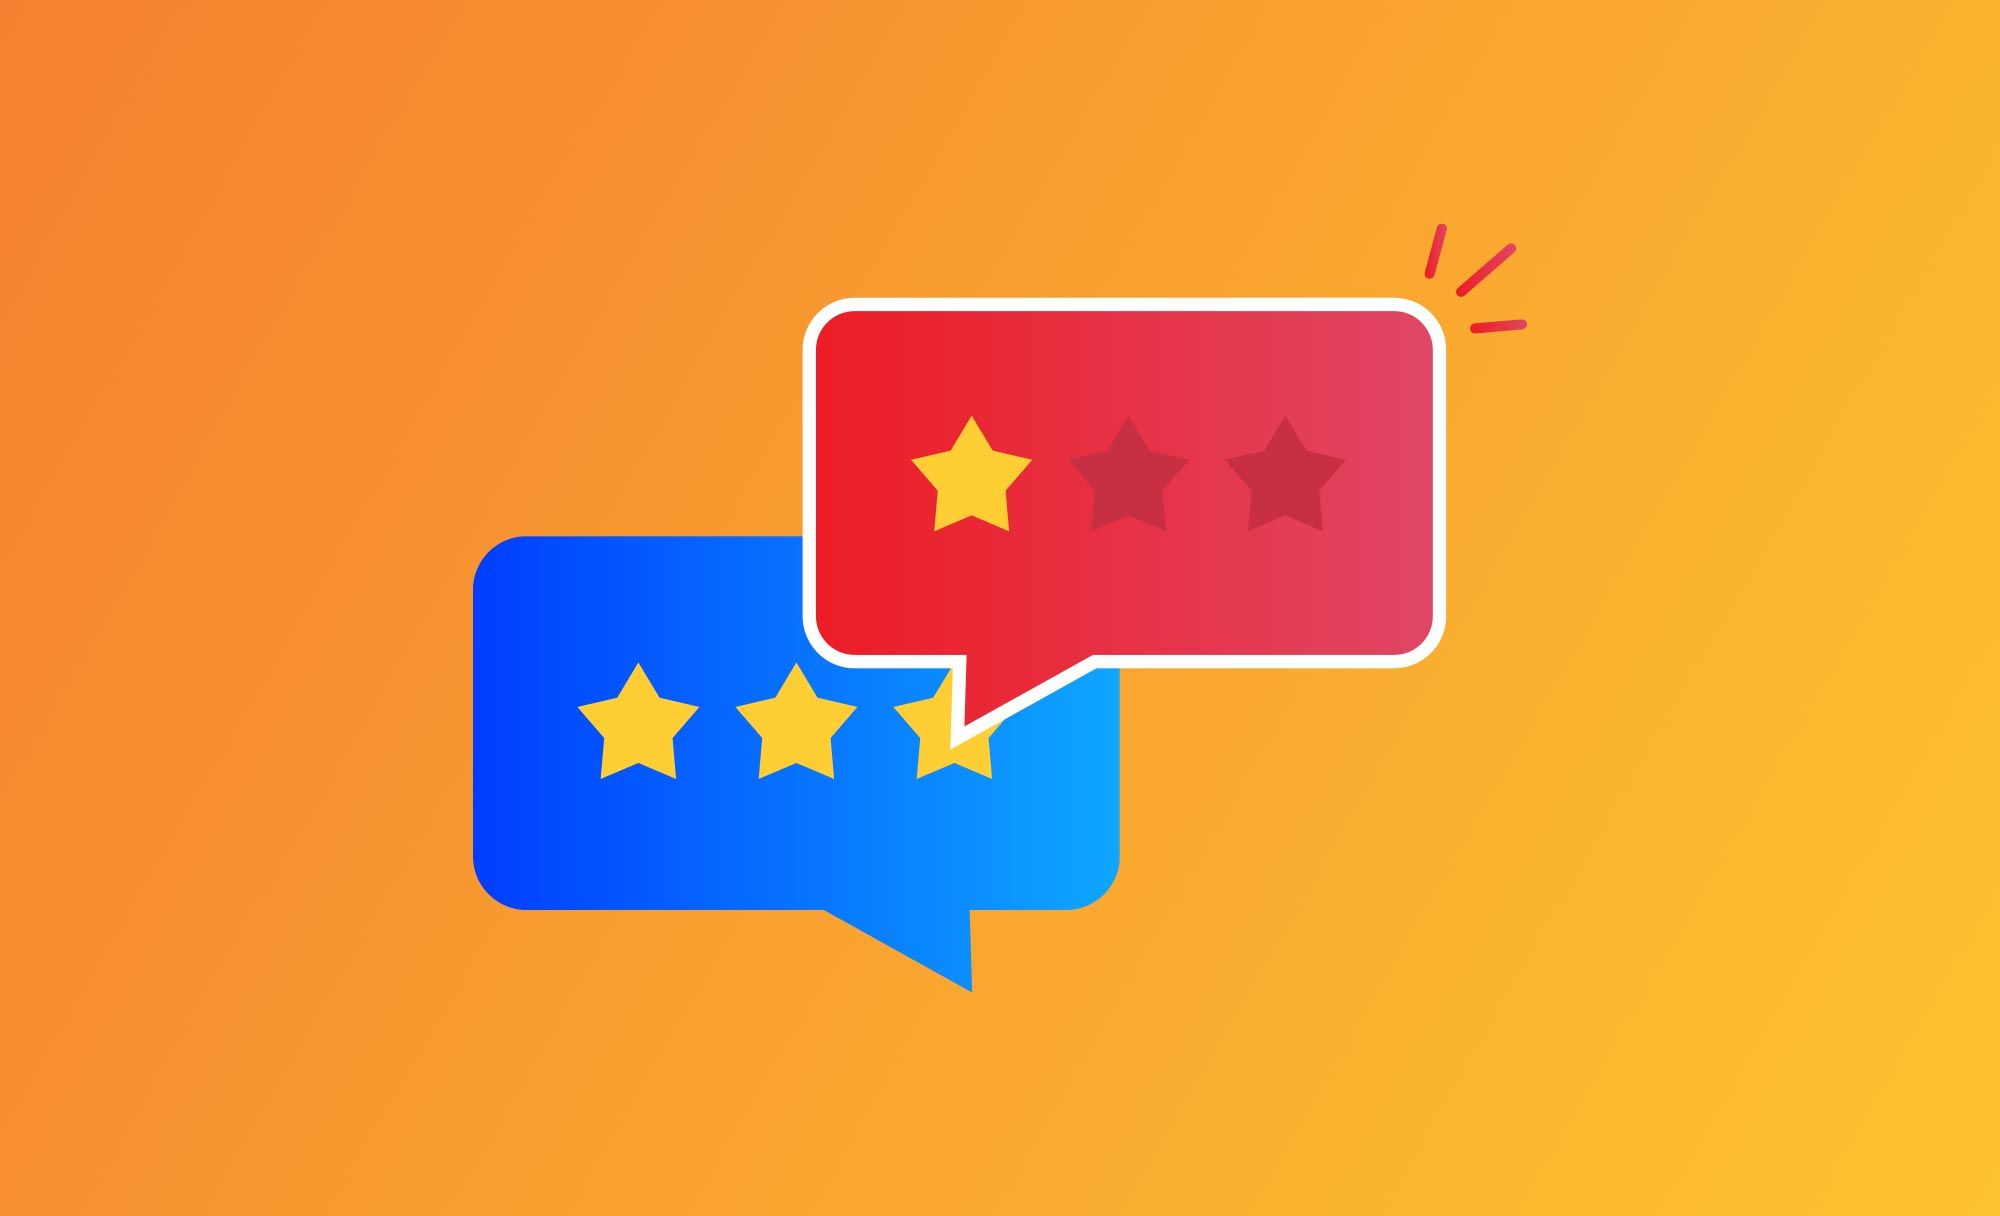 Asking for a review? Here's how to get the best response (with templates).